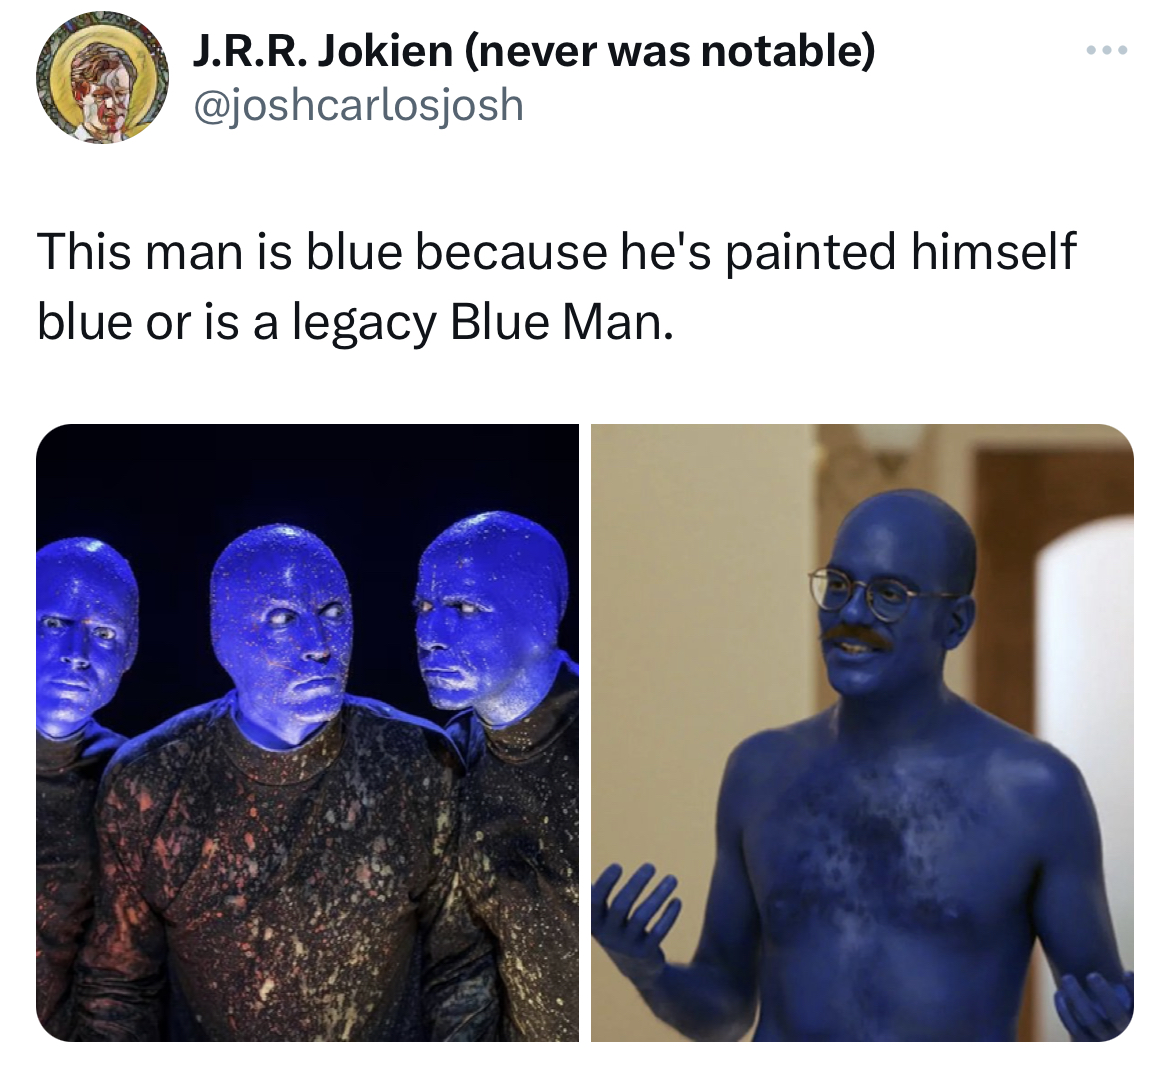 savage absurd tweets human - J.R.R. Jokien never was notable This man is blue because he's painted himself blue or is a legacy Blue Man.